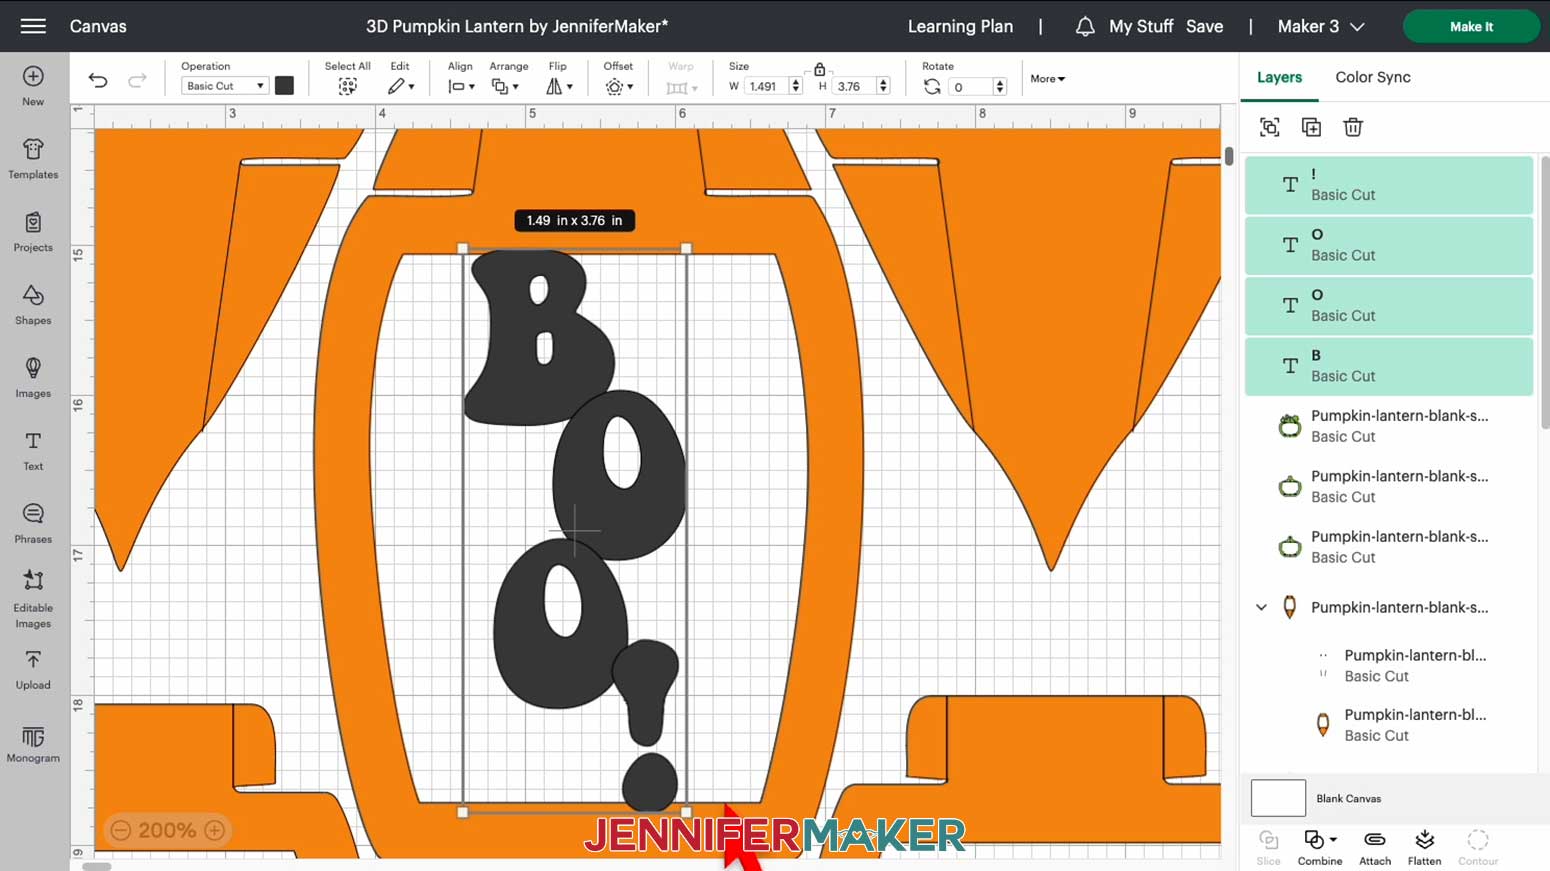 Resize the word "boo!" so it fits within the 3D pumpkin lantern's orange panel and slightly overlaps the top and bottom of the panel's frame